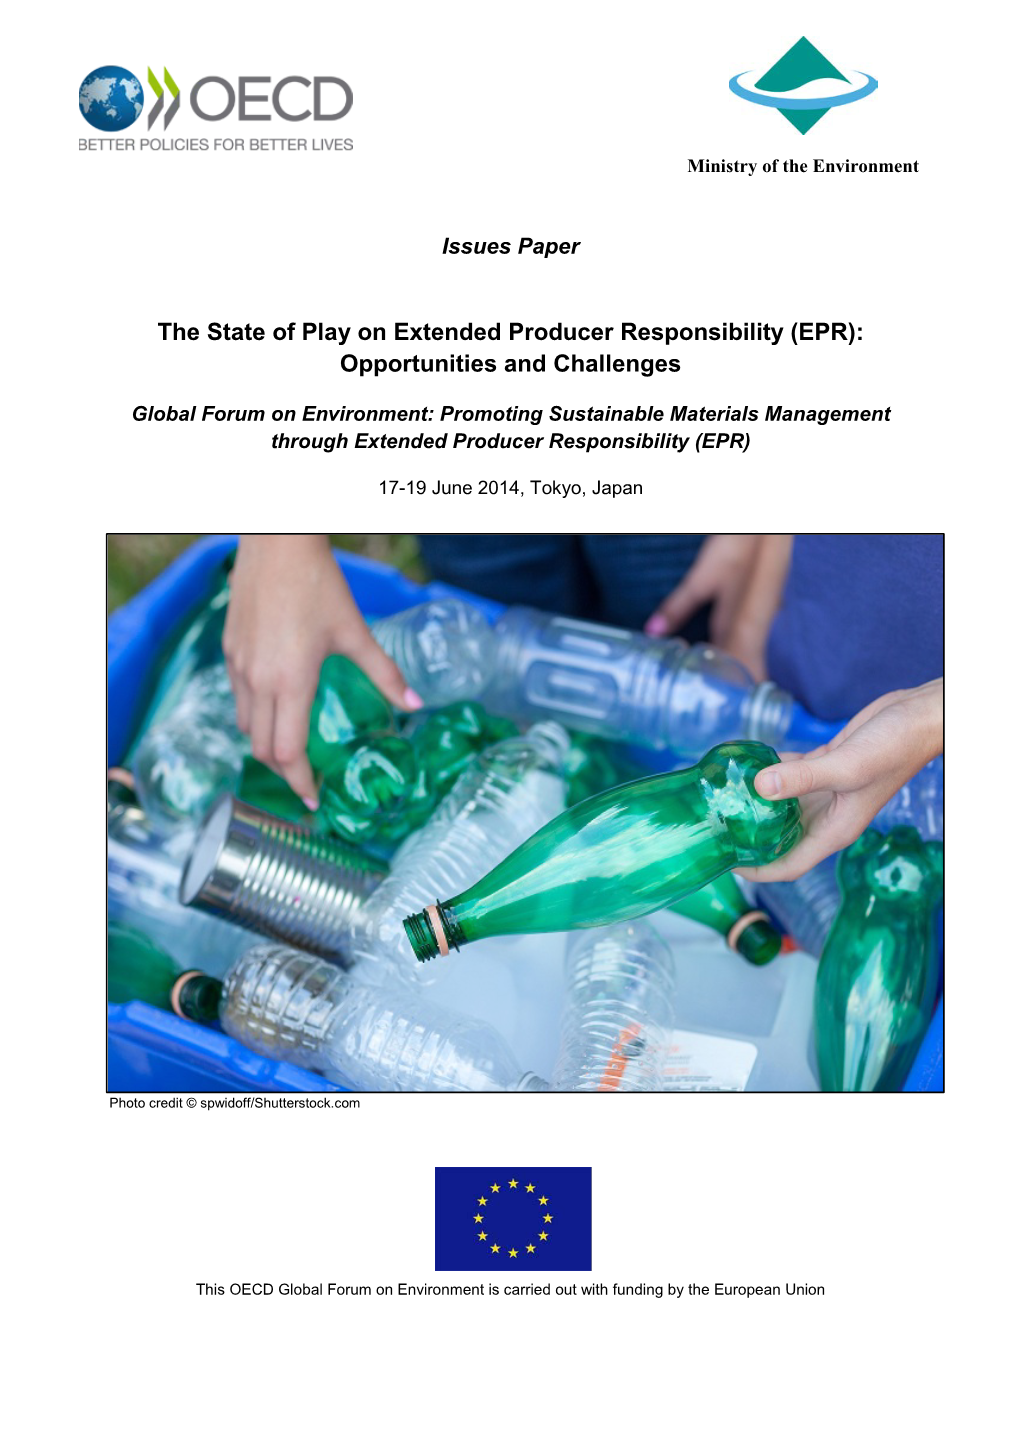 The State of Play on Extended Producer Responsibility (EPR): Opportunities and Challenges